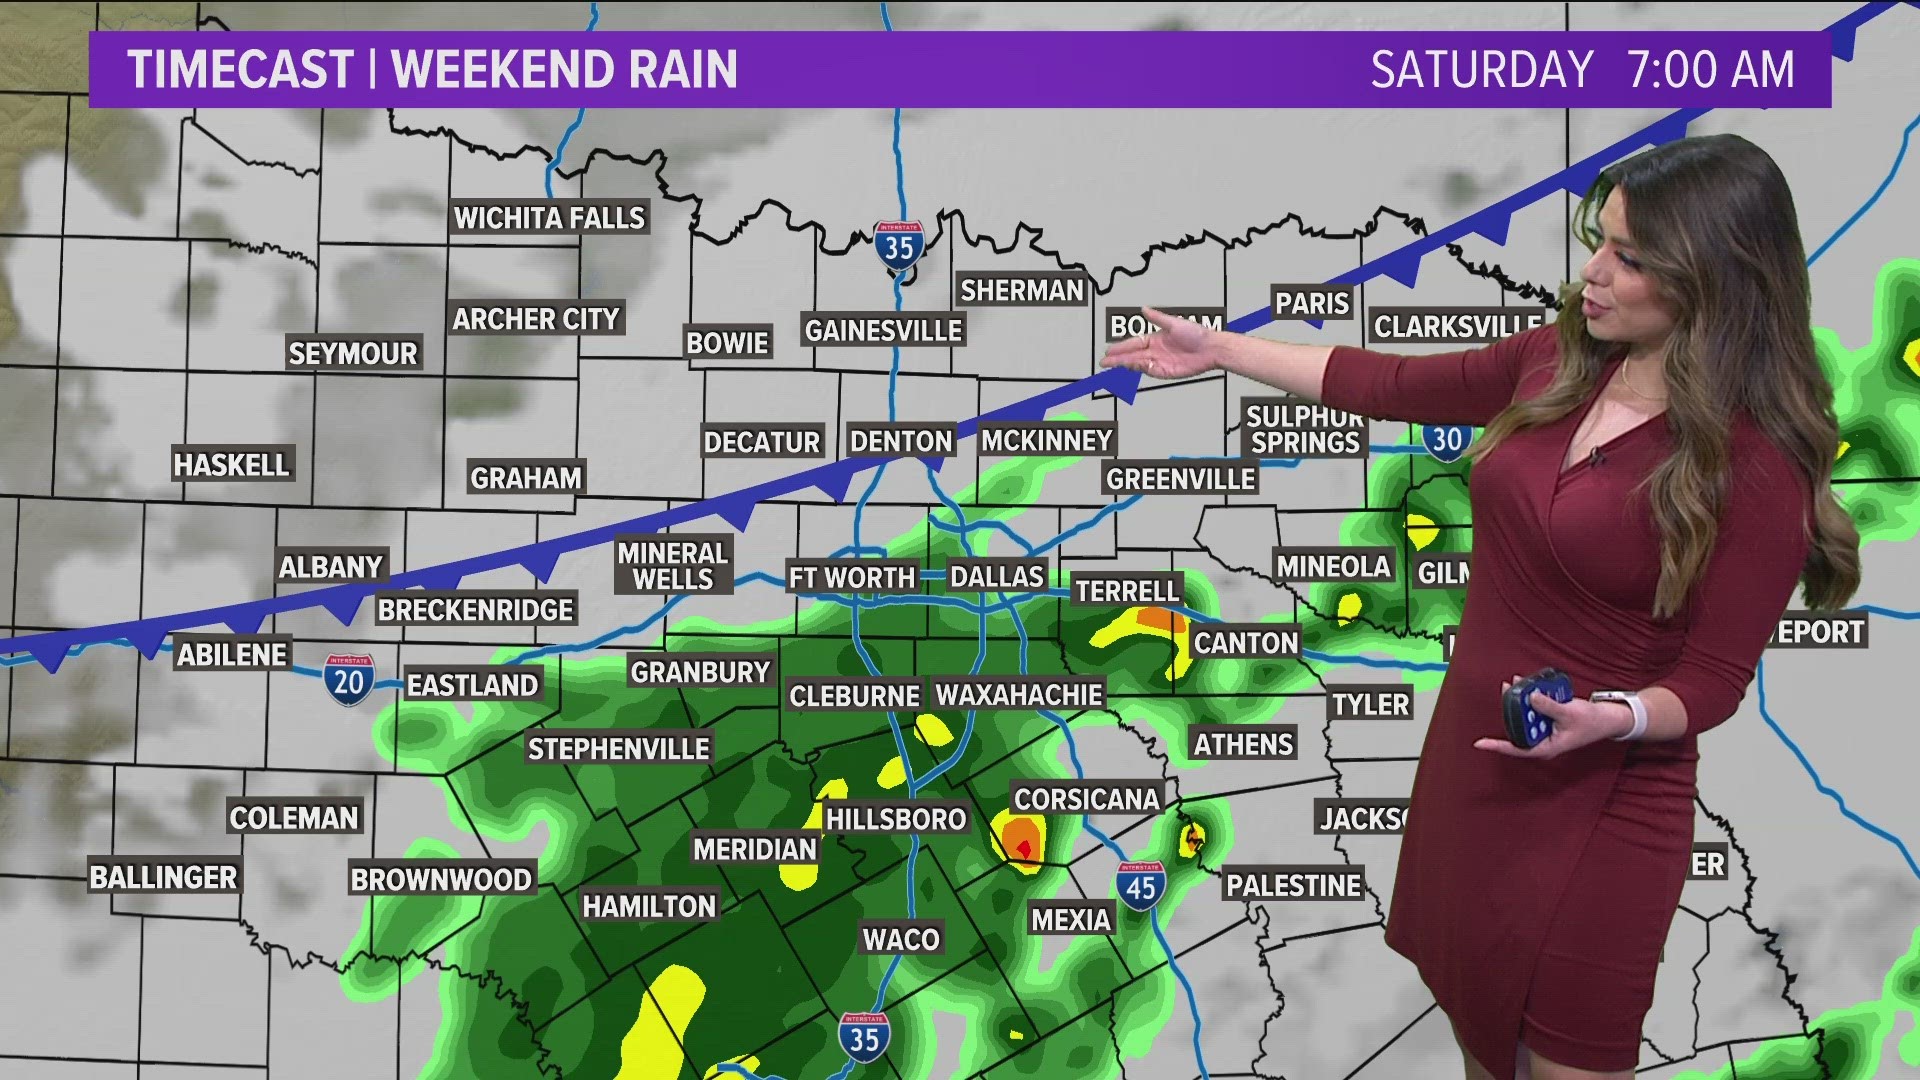 DFW Weather: Tracking weekend rain for North Texas.